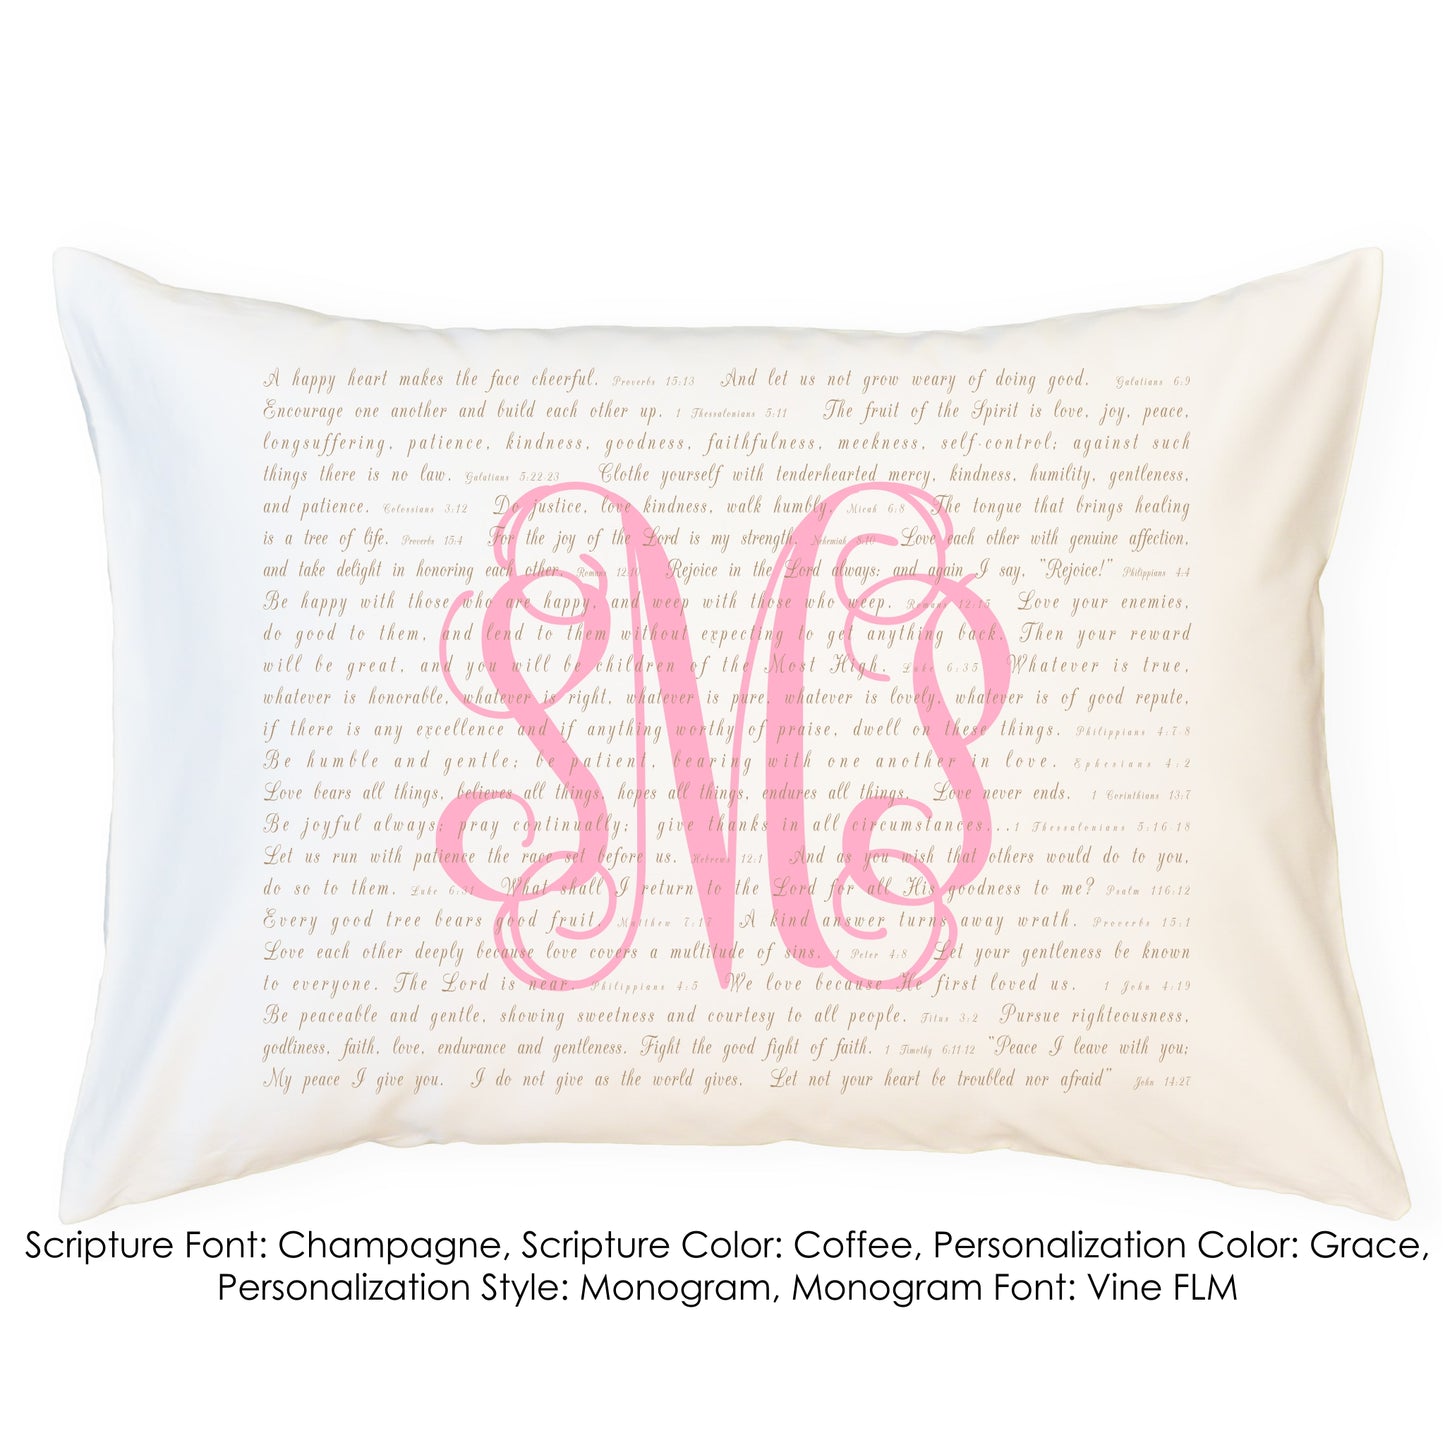 Scripture for the Happy Heart - Standard Pillowcase